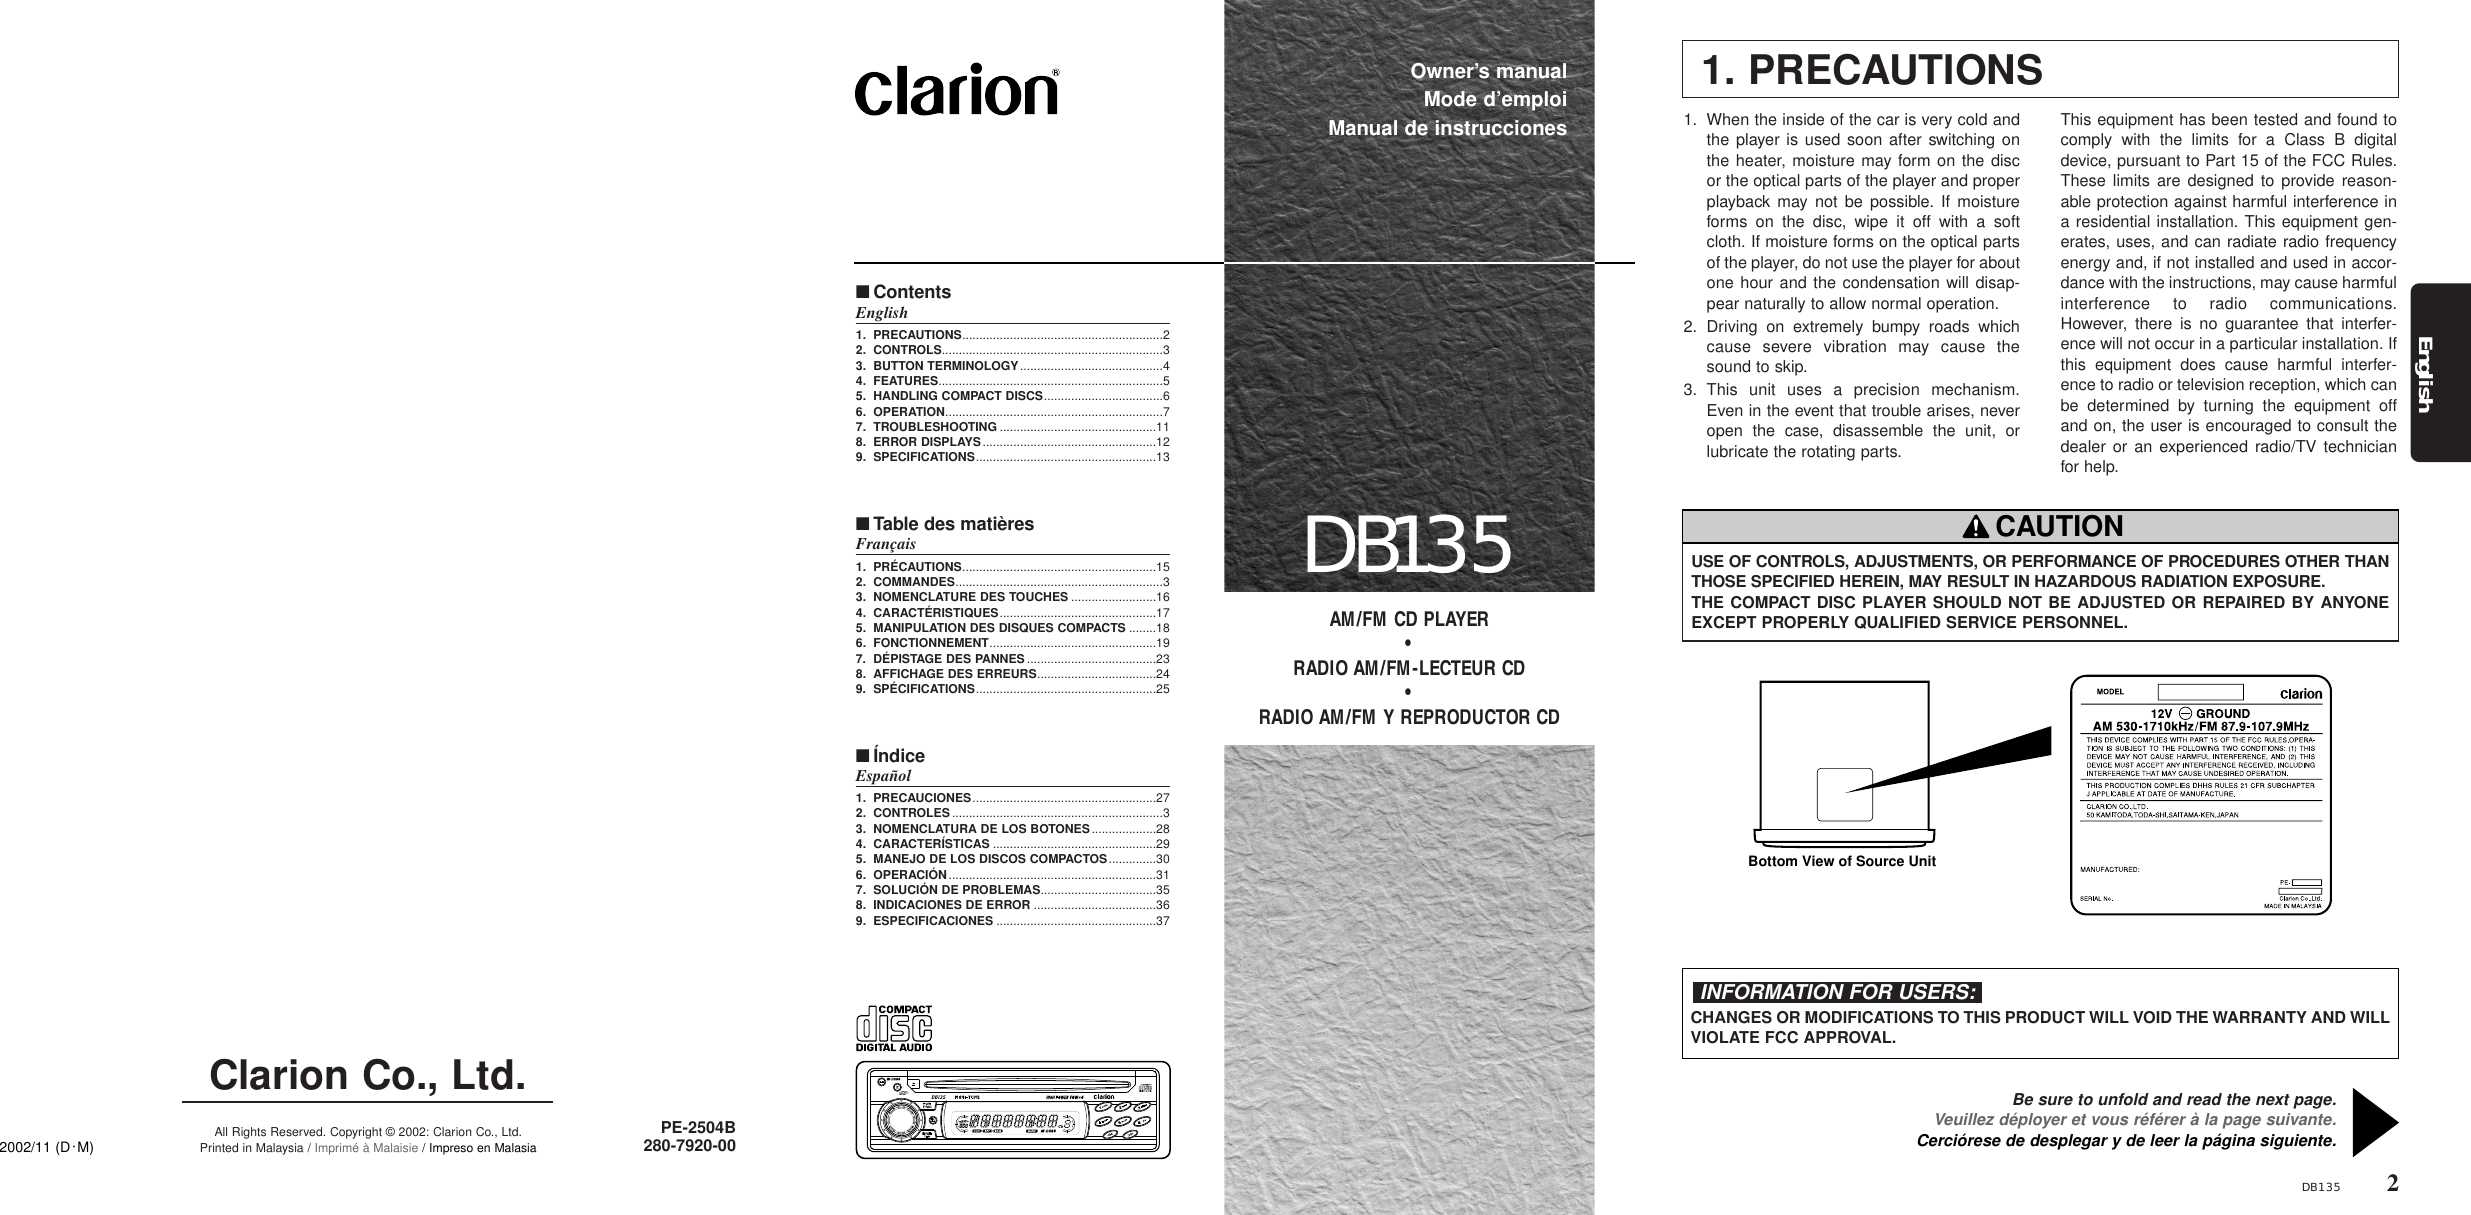 Page 1 of 12 - Clarion Clarion-Db135-Users-Manual- 280-7920-00_Cover  Clarion-db135-users-manual